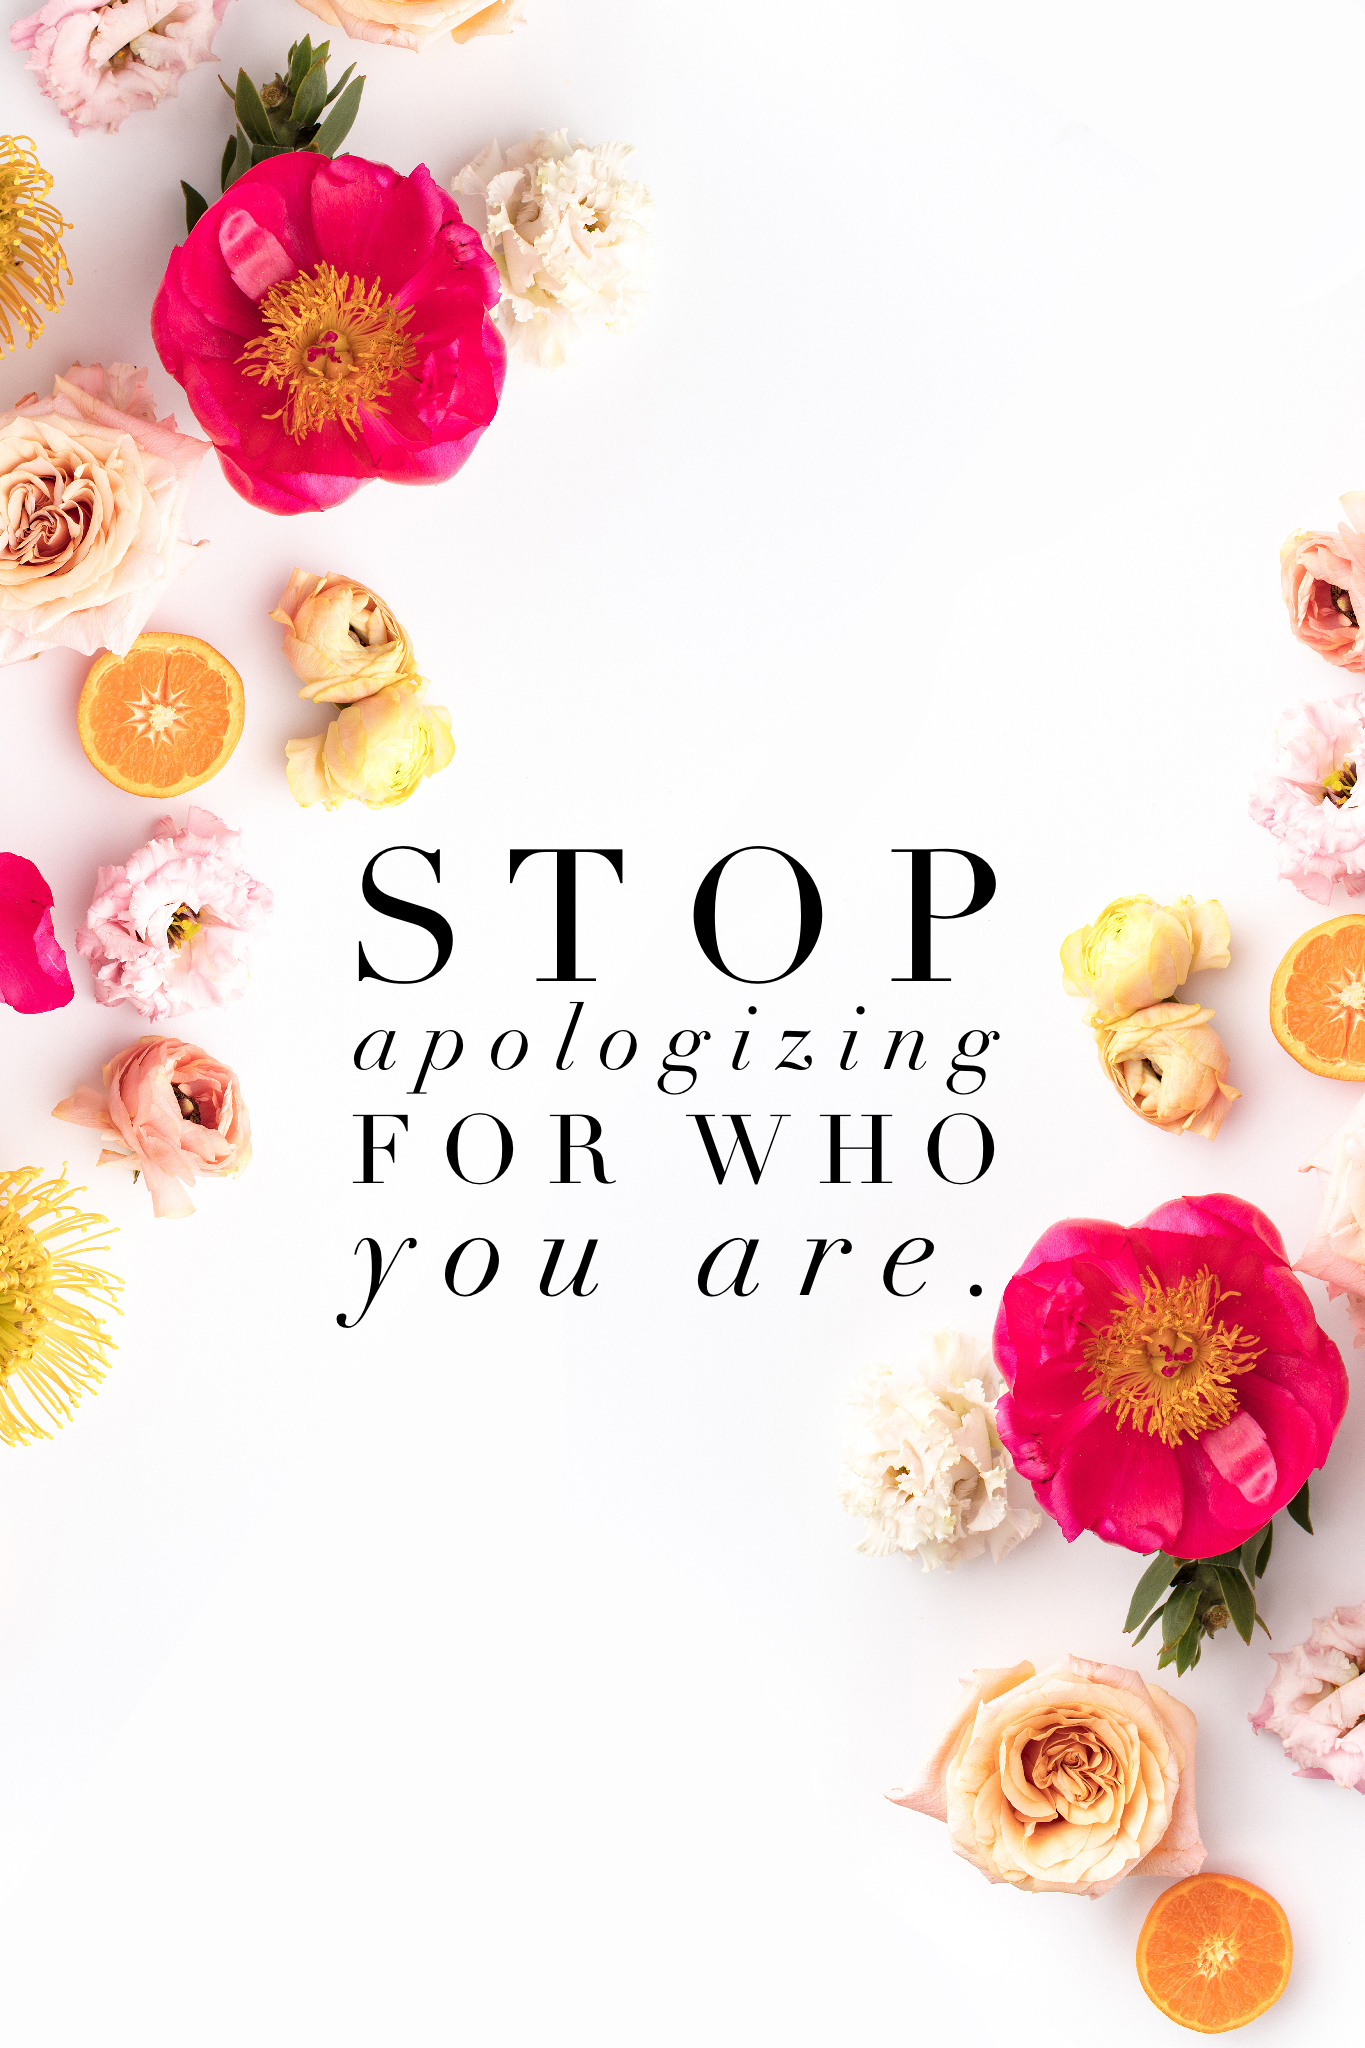 Life Quotes: Stop apologizing for who you are. How to get more followers on social media and why you should be authentic to your true self.